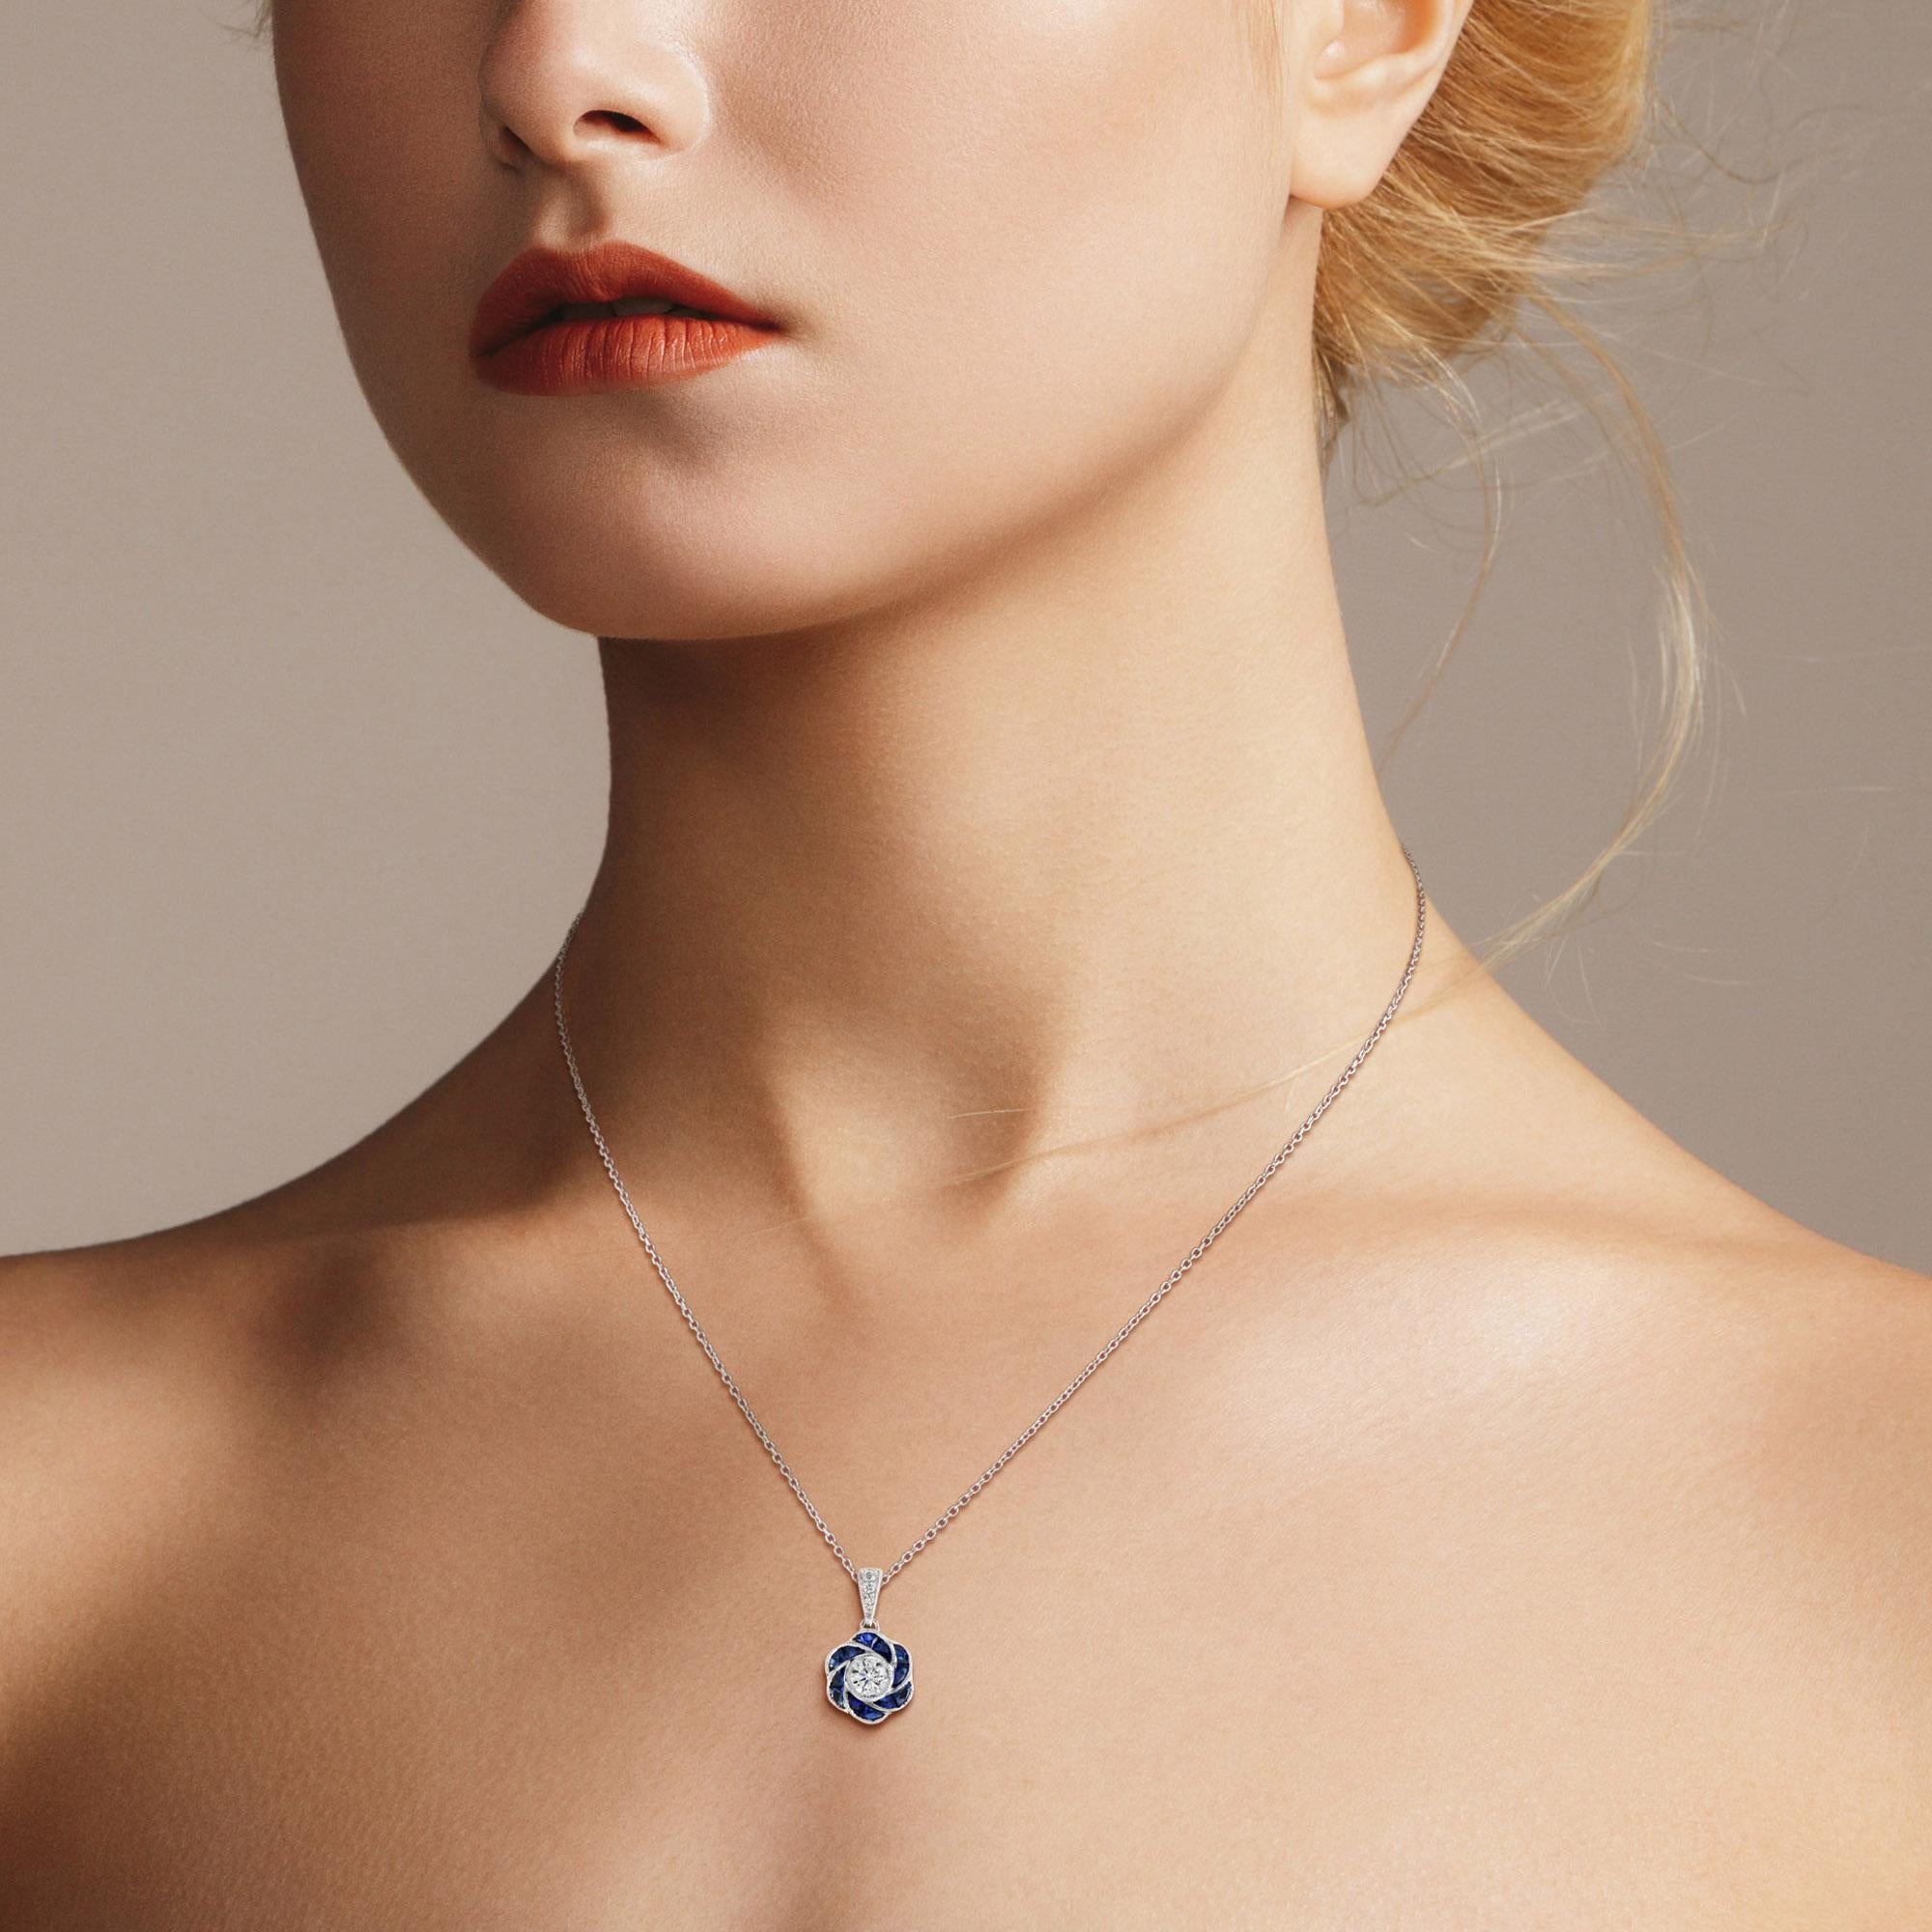 Perfect with everyday wear, this charming vintage Art Deco revivalist design pendant features brilliant-cut diamonds surrounded by bright blue sapphire for rose petals finished look all in 18K white gold.

Information
Style: Art-deco
Metal: 18K